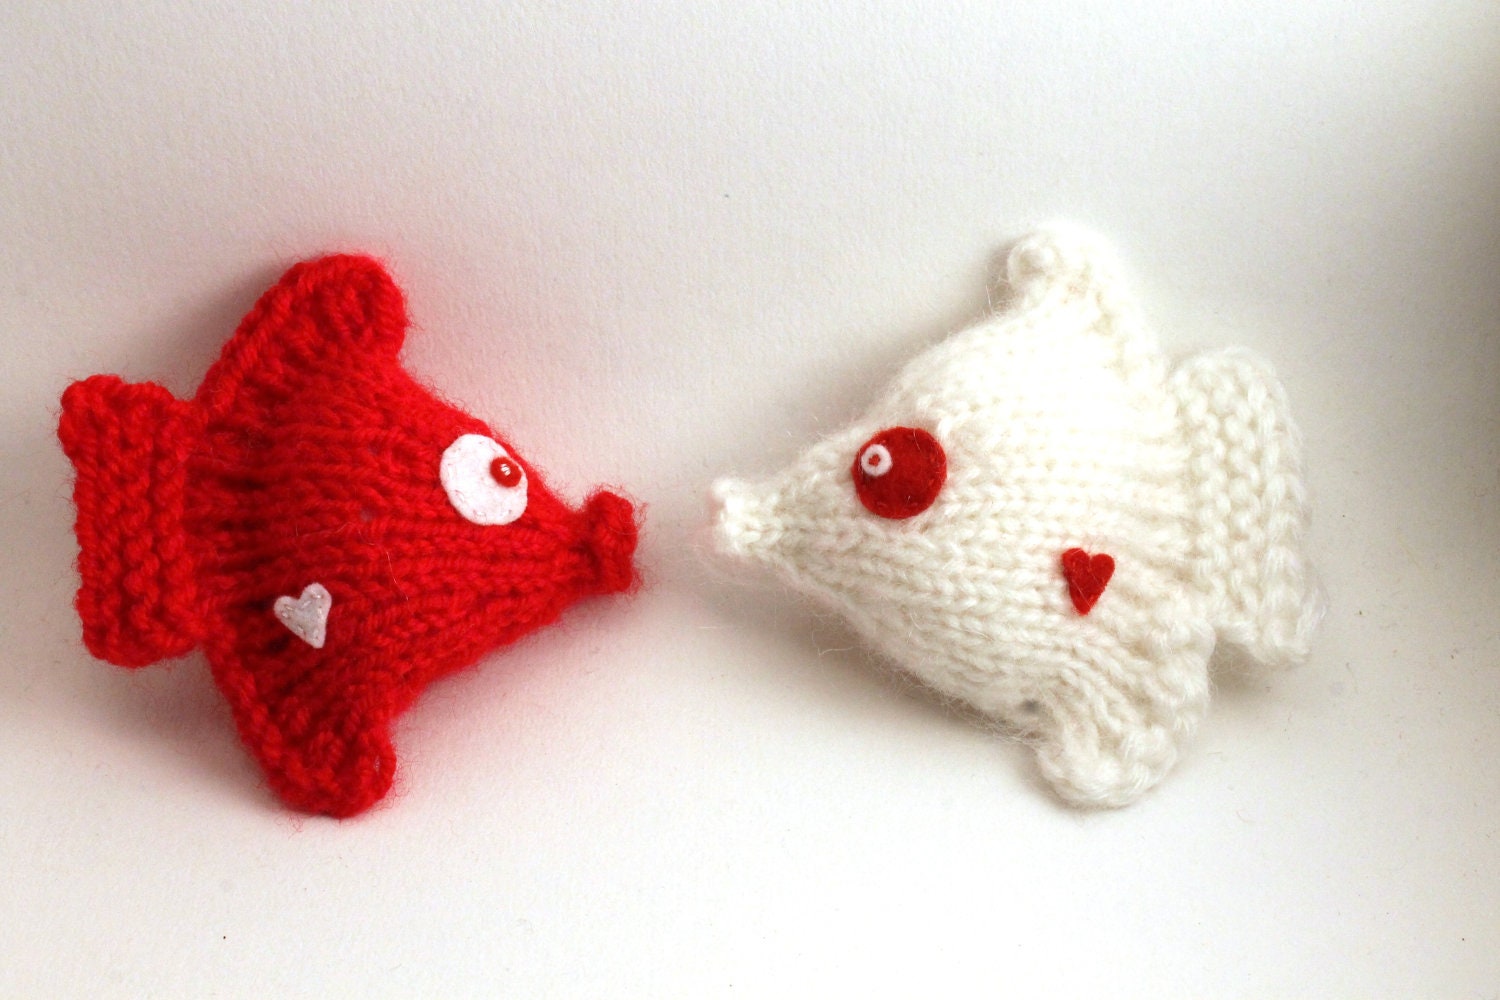 Knitted red & white fishes. Soft child safe St. Valentine's day gift - set of 2 tropical fishes - home decor for kids - red heart